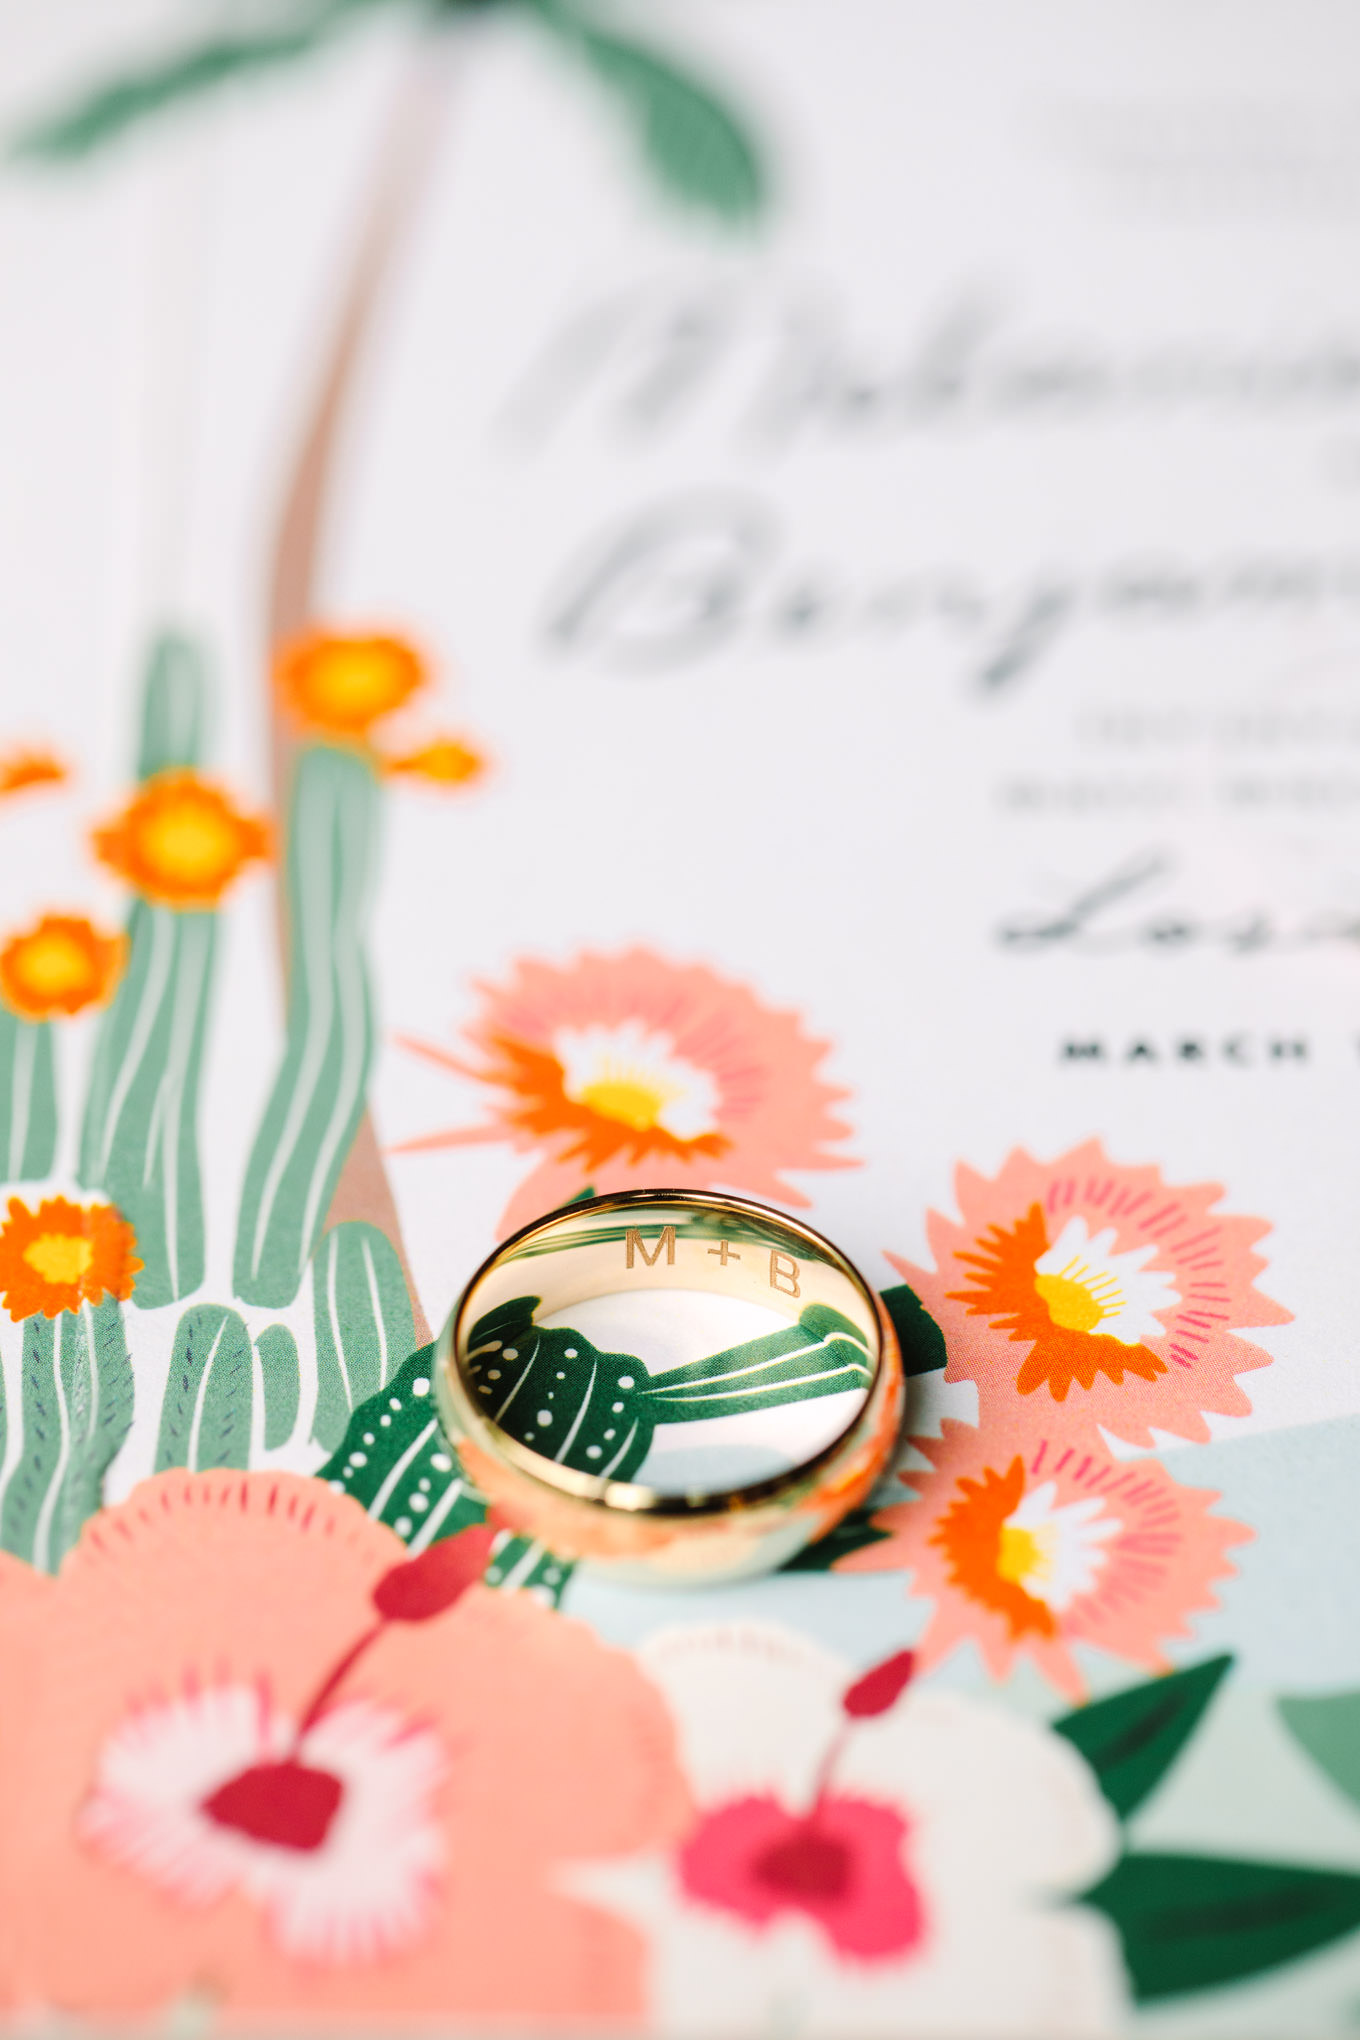 Groom's gold wedding band with initials | TV inspired wedding at The Fig House Los Angeles | Published on The Knot | Fresh and colorful photography for fun-loving couples in Southern California | #losangeleswedding #TVwedding #colorfulwedding #theknot   Source: Mary Costa Photography | Los Angeles wedding photographer